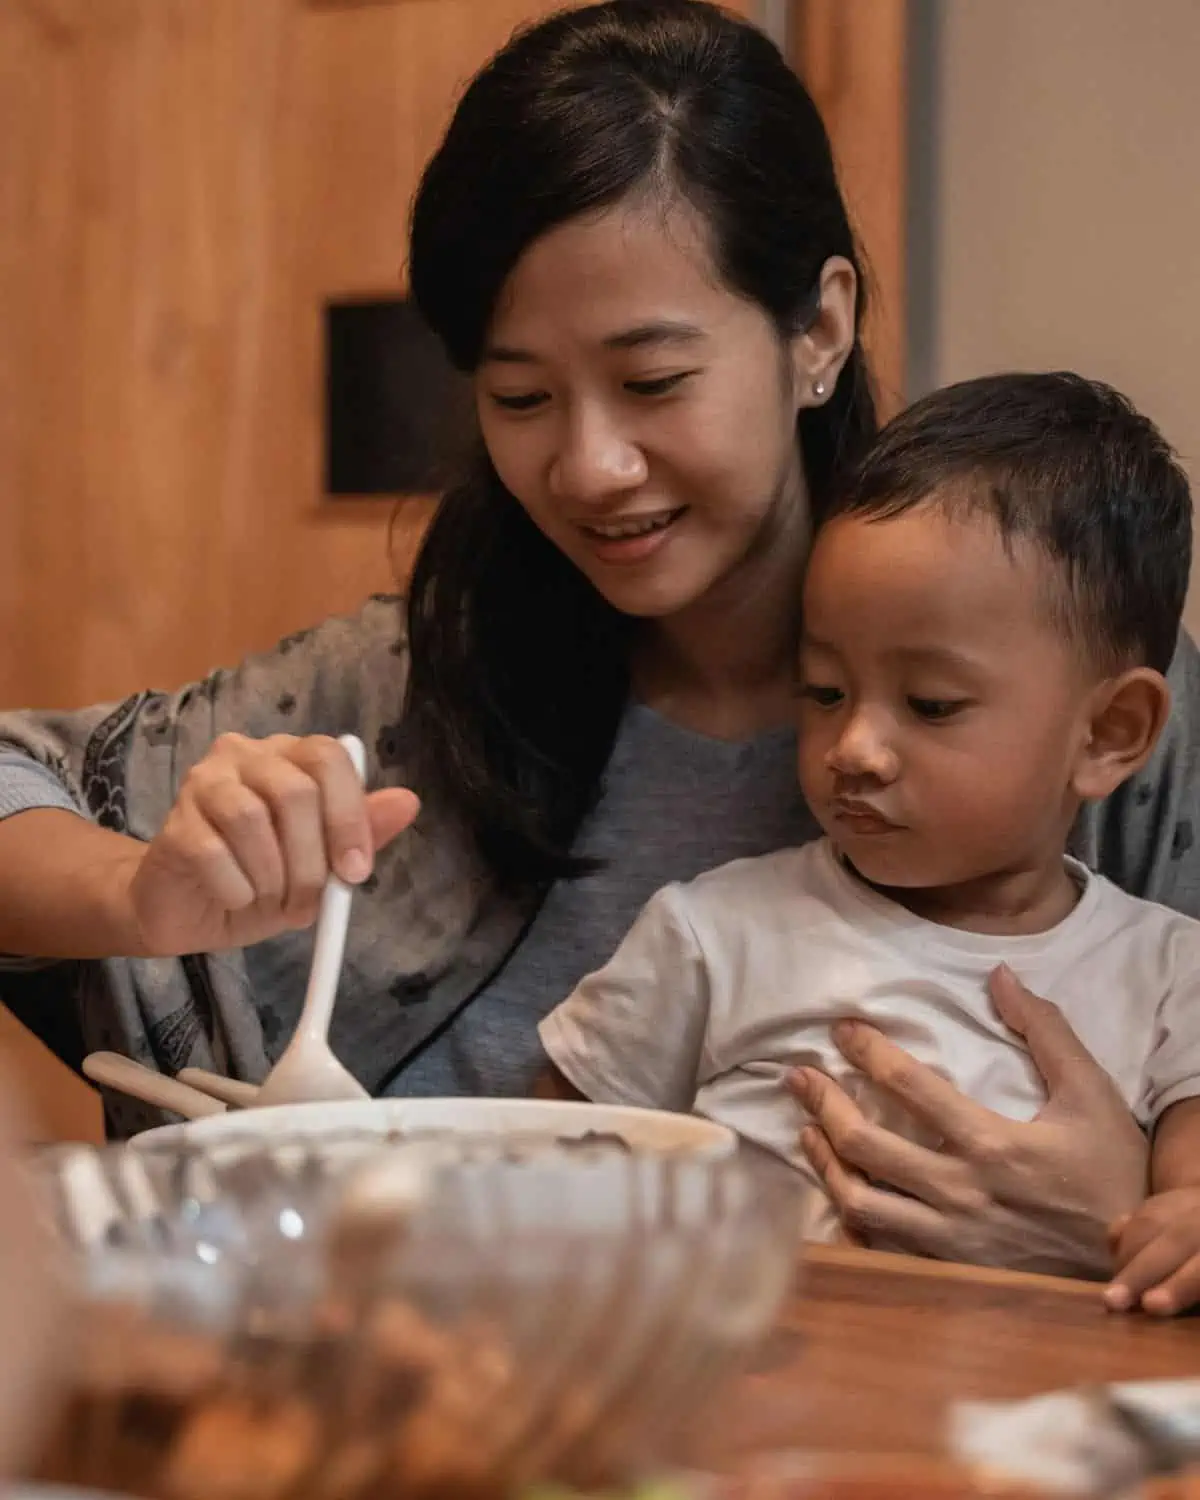 Mother and child enjoying a meal together. image is for a recipe post on tips and meal ideas for picky eaters.